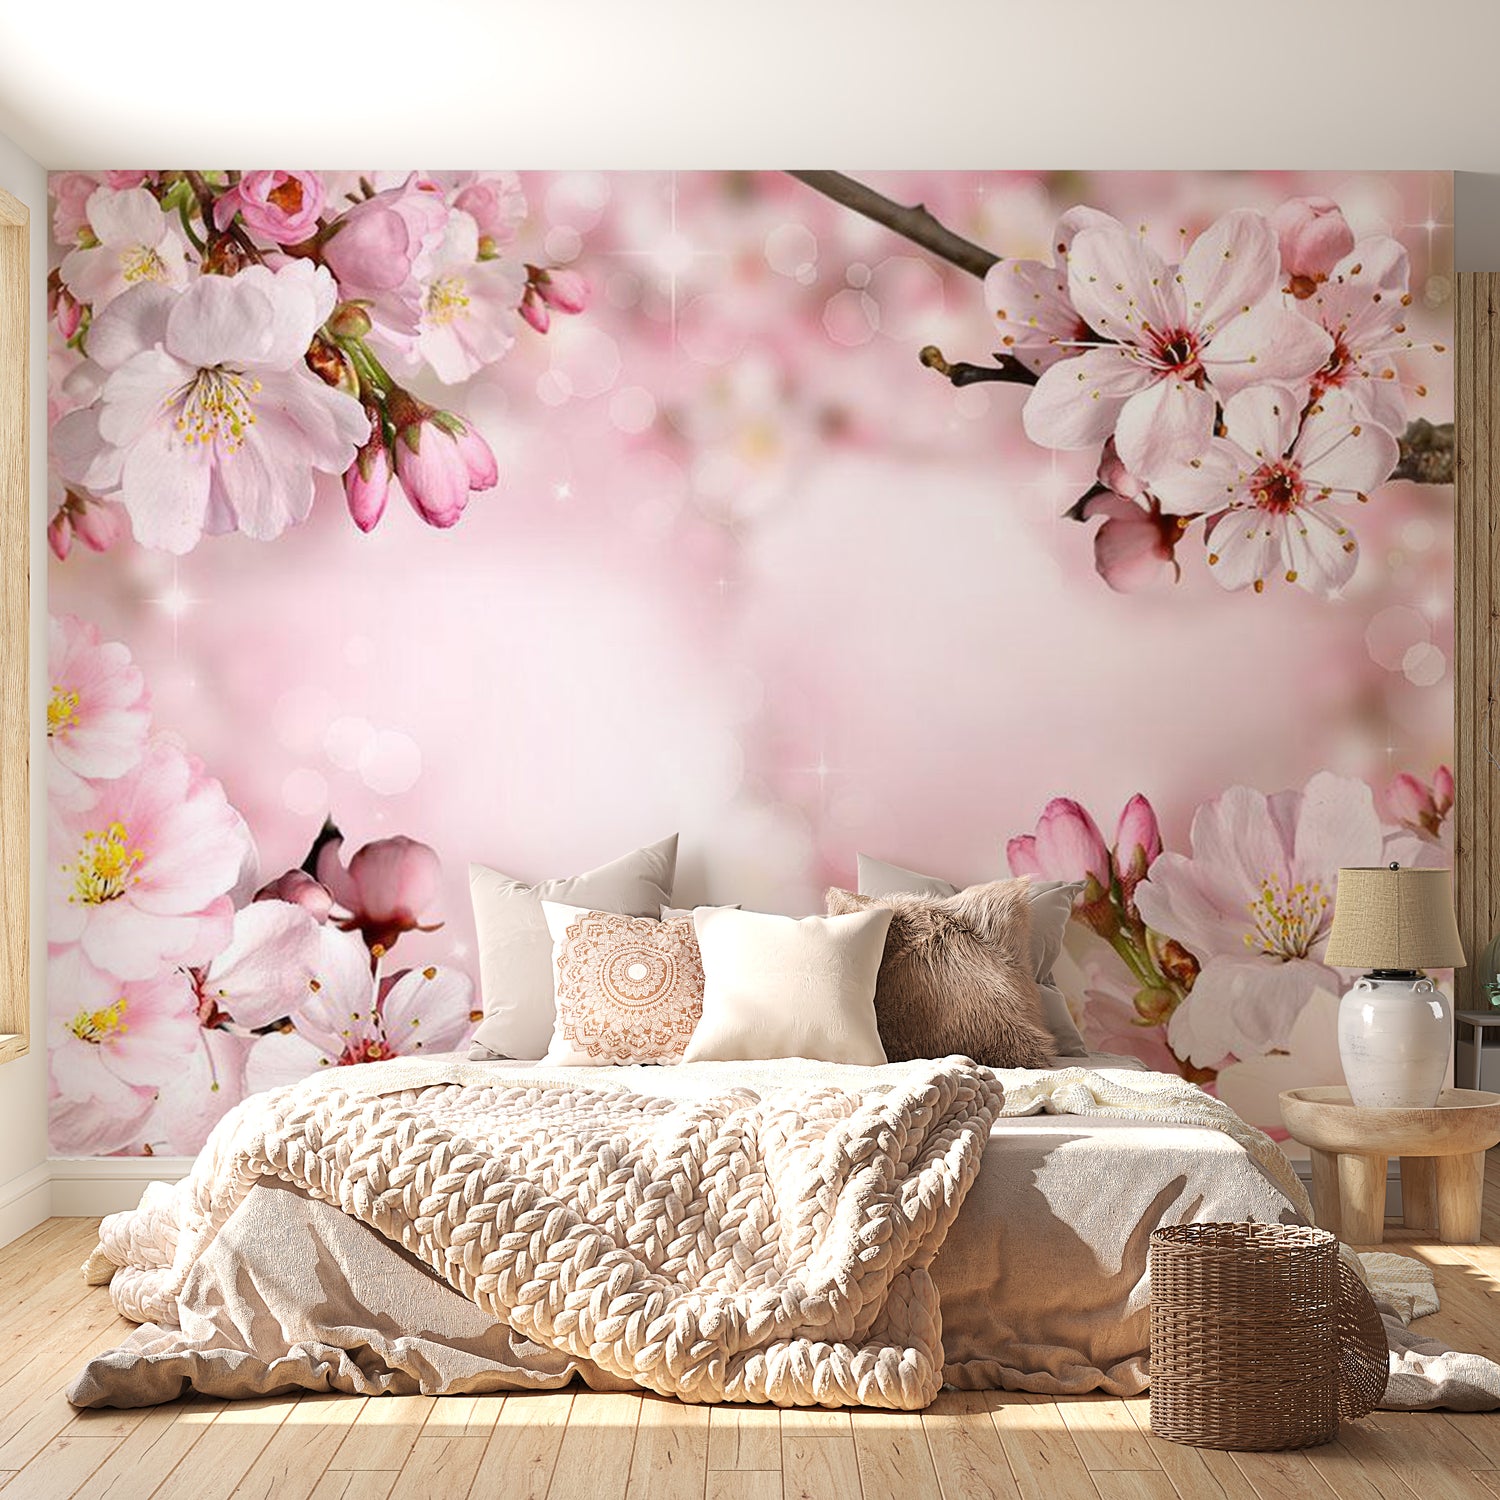 Peel & Stick Floral Wall Mural - Spring Cherry Blossom - Removable Wall Decals